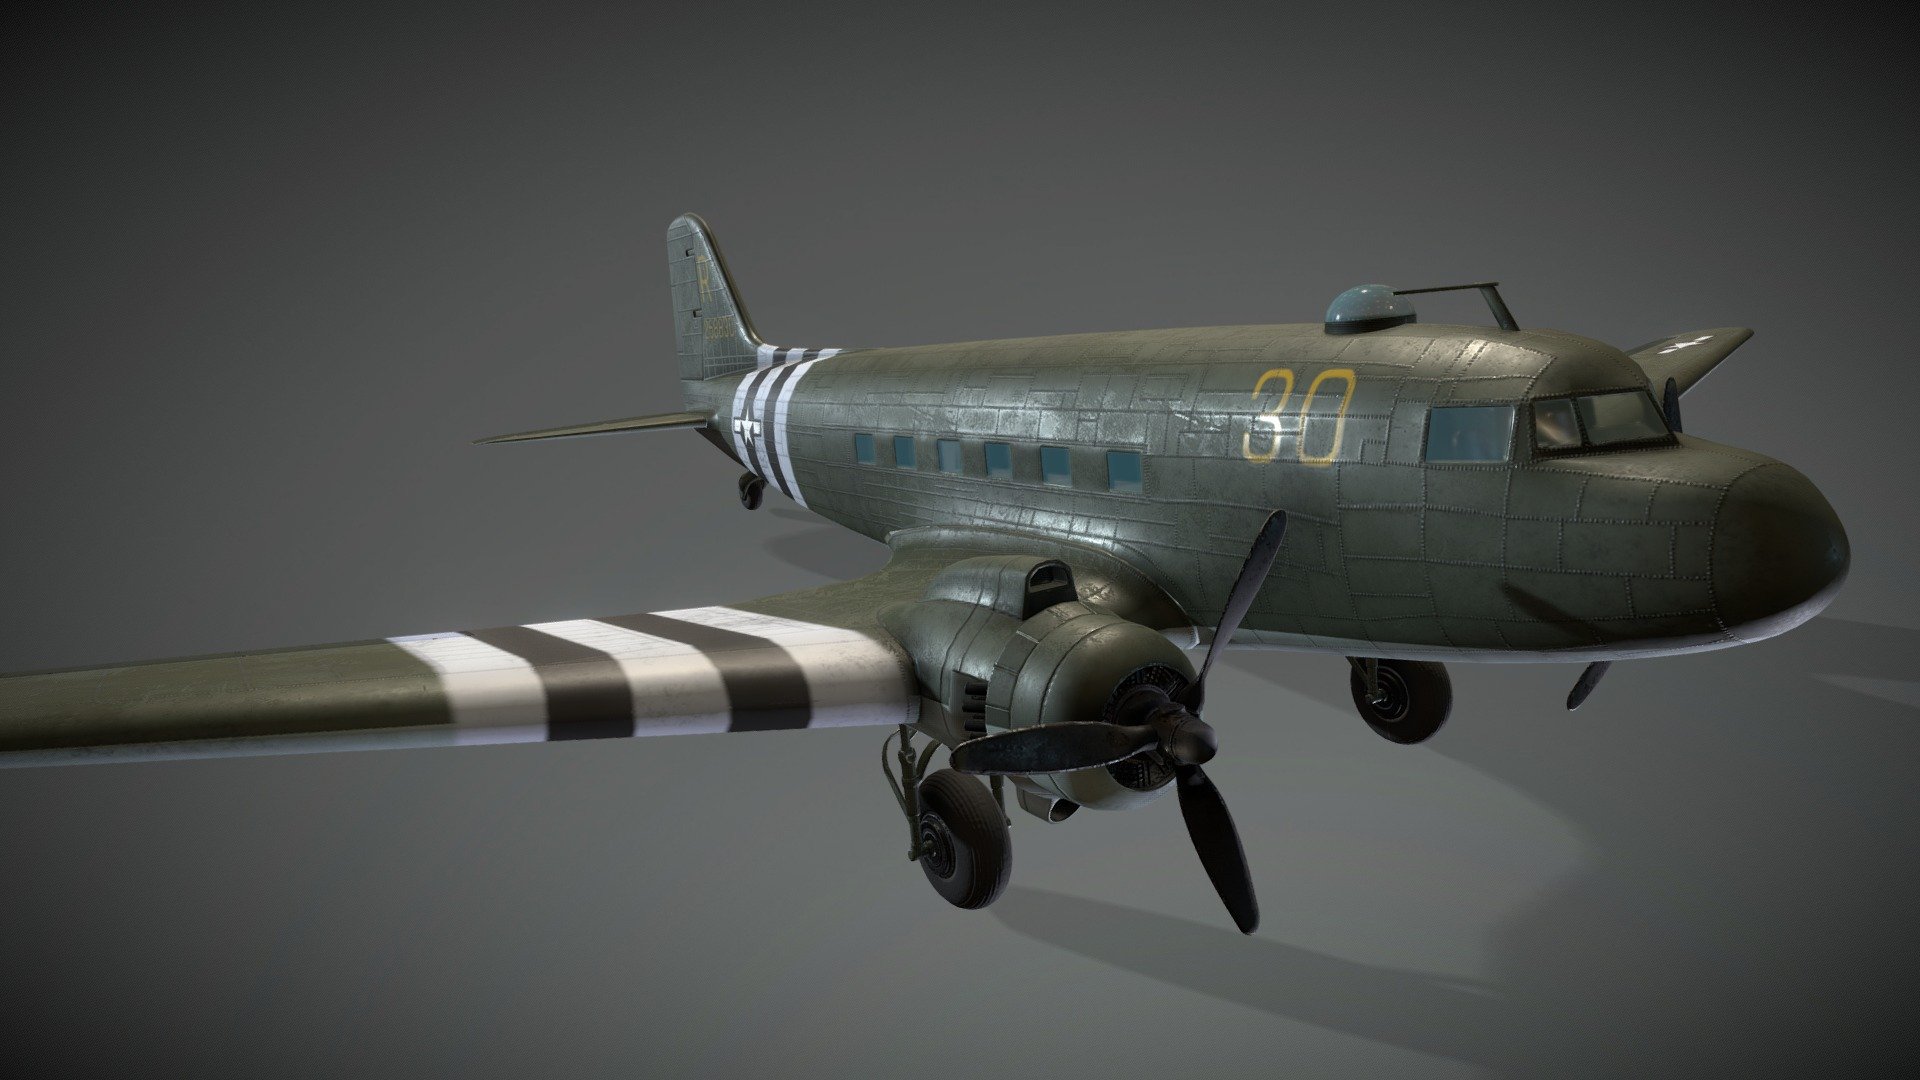 Douglas C-47 Skytrain

3D Model for Escape Germany (PC-Game)

Fully rigged an animated ingame. Flight Example BF109: https://www.youtube.com/watch?v=jb6zUBnfUZE&amp;t=8s

Model + Textures by: David Falke

Rigged + Animations by: Spaehling

Website: https://www.grip420.com/

Discord: Follow us on Discord

Facebook Follow us on Facebook

Game  Escape Germany - Escape Germany - Douglas C-47 Skytrain - 3D model by GRIP420 3d model